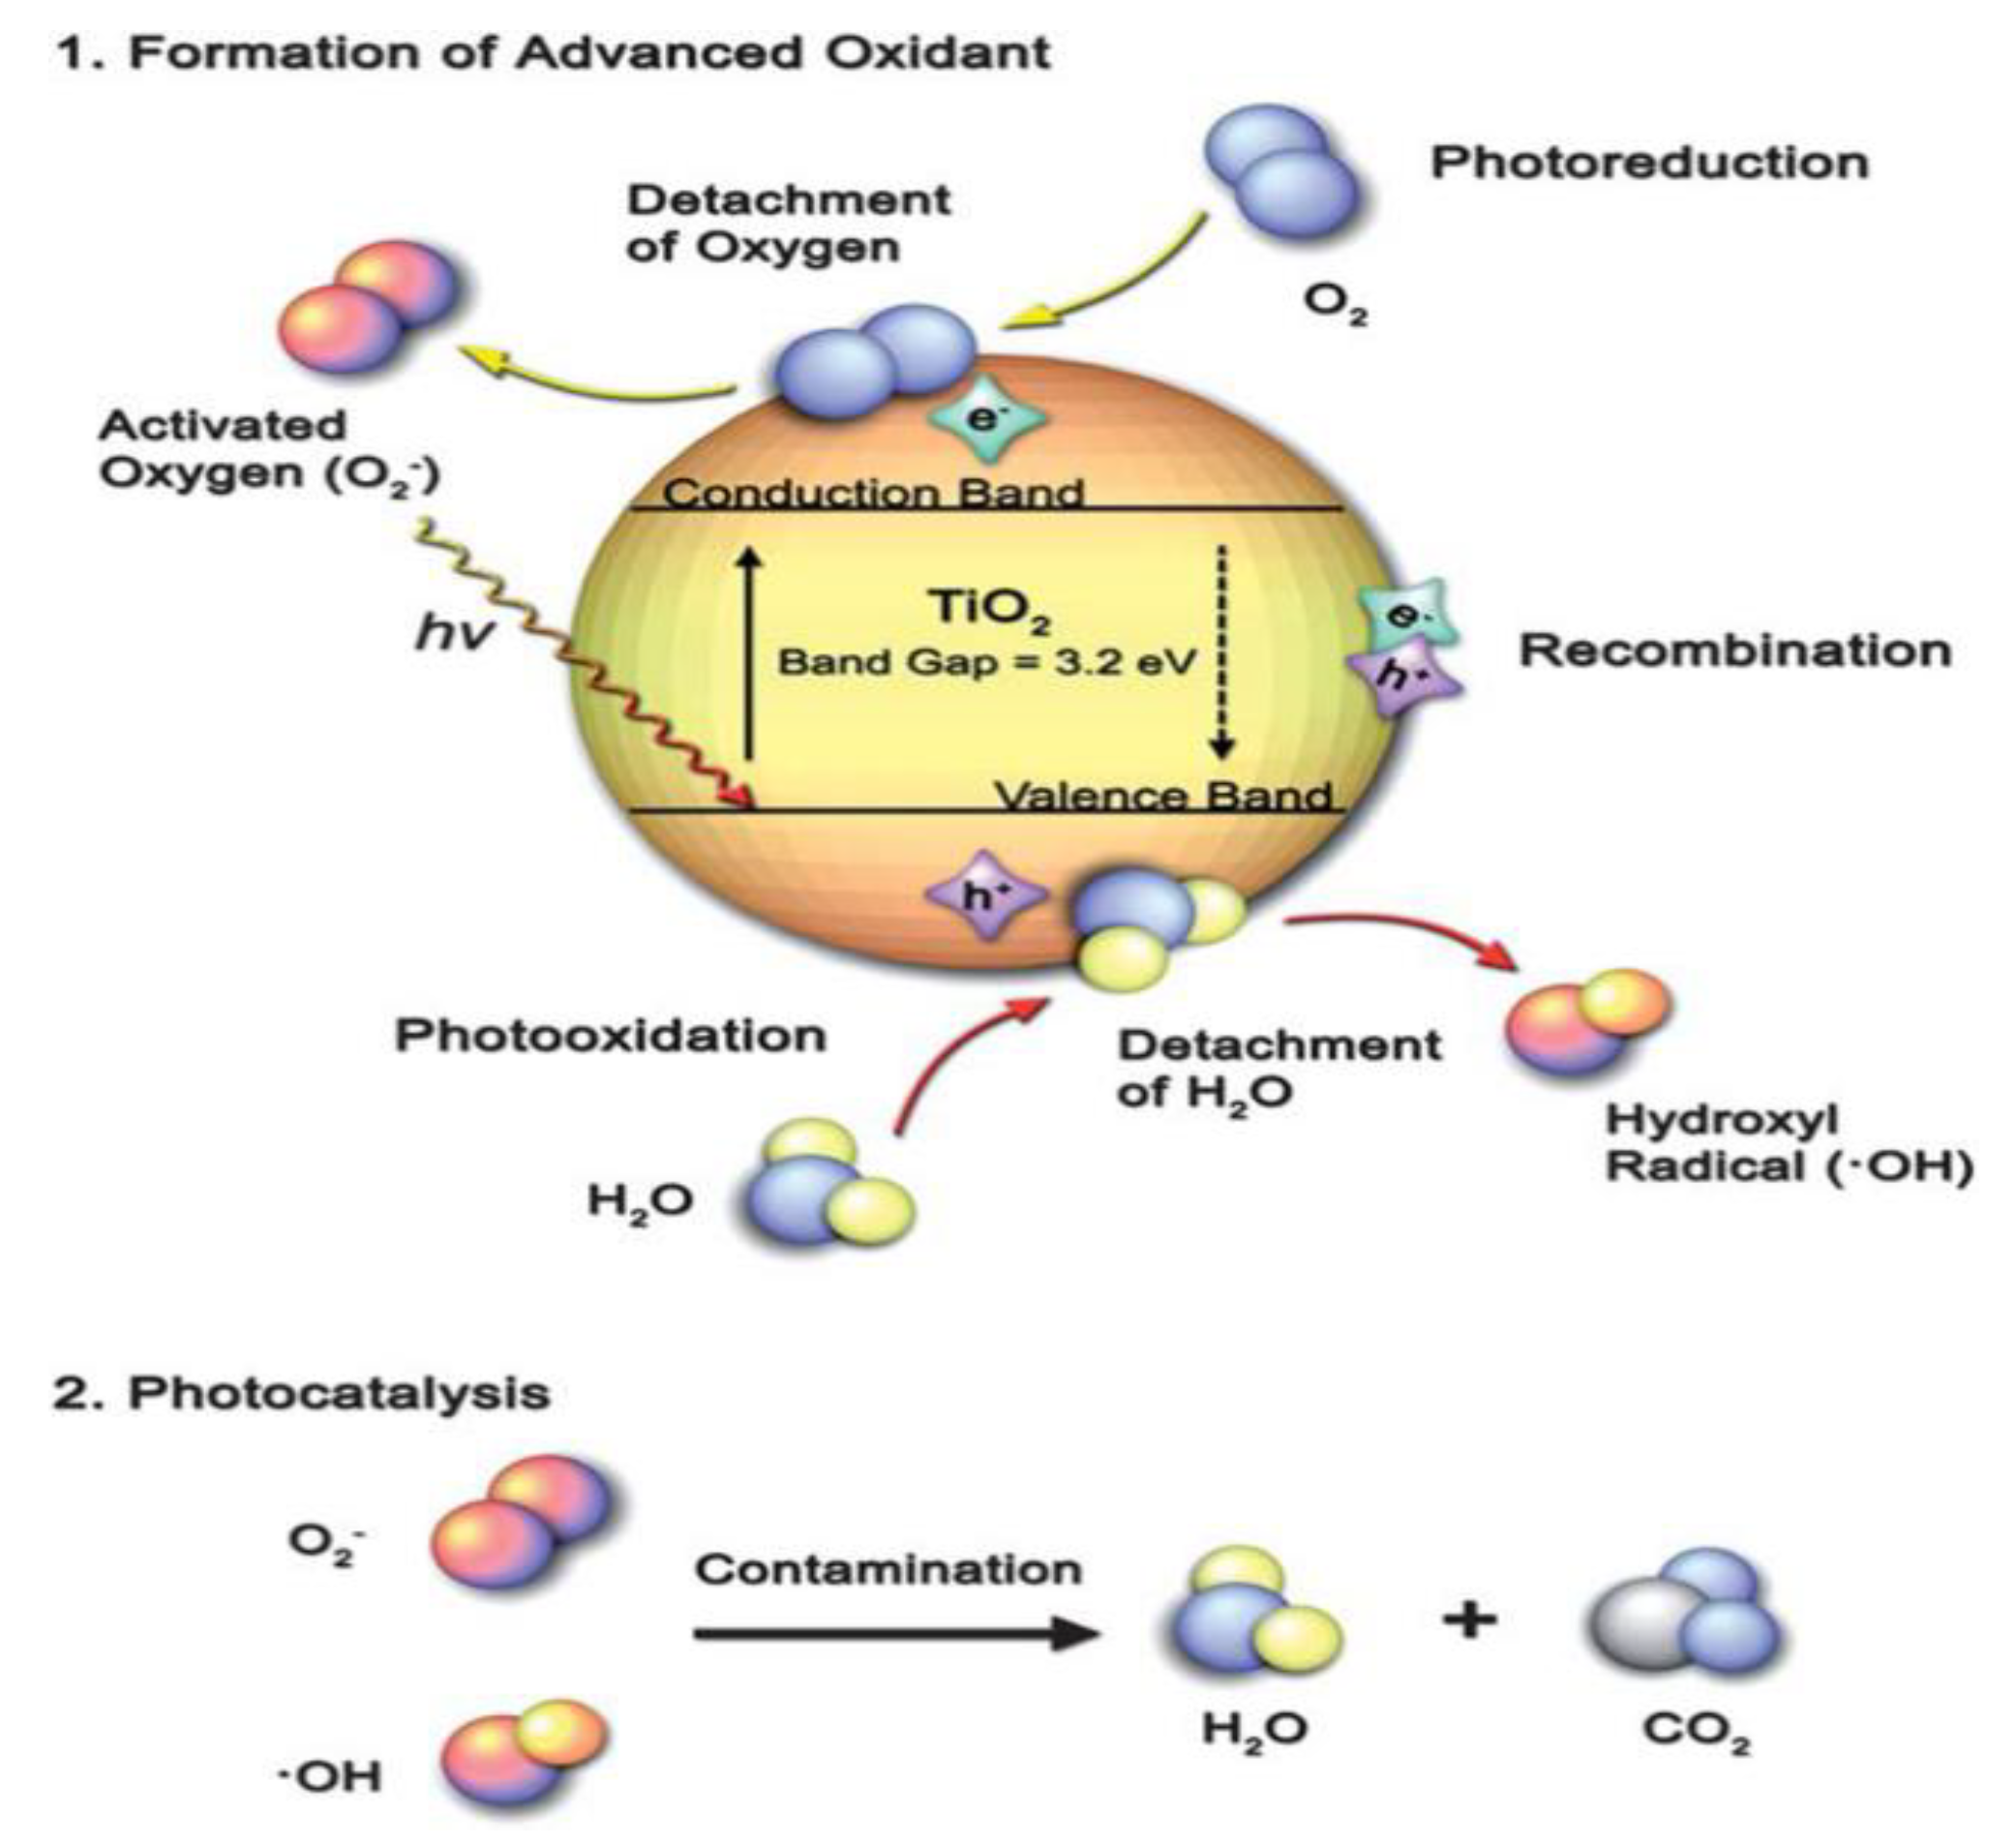 Coatings | Free Full-Text | Recent Advances in TiO2 Films Prepared by  Sol-Gel Methods for Photocatalytic Degradation of Organic Pollutants and  Antibacterial Activities | HTML